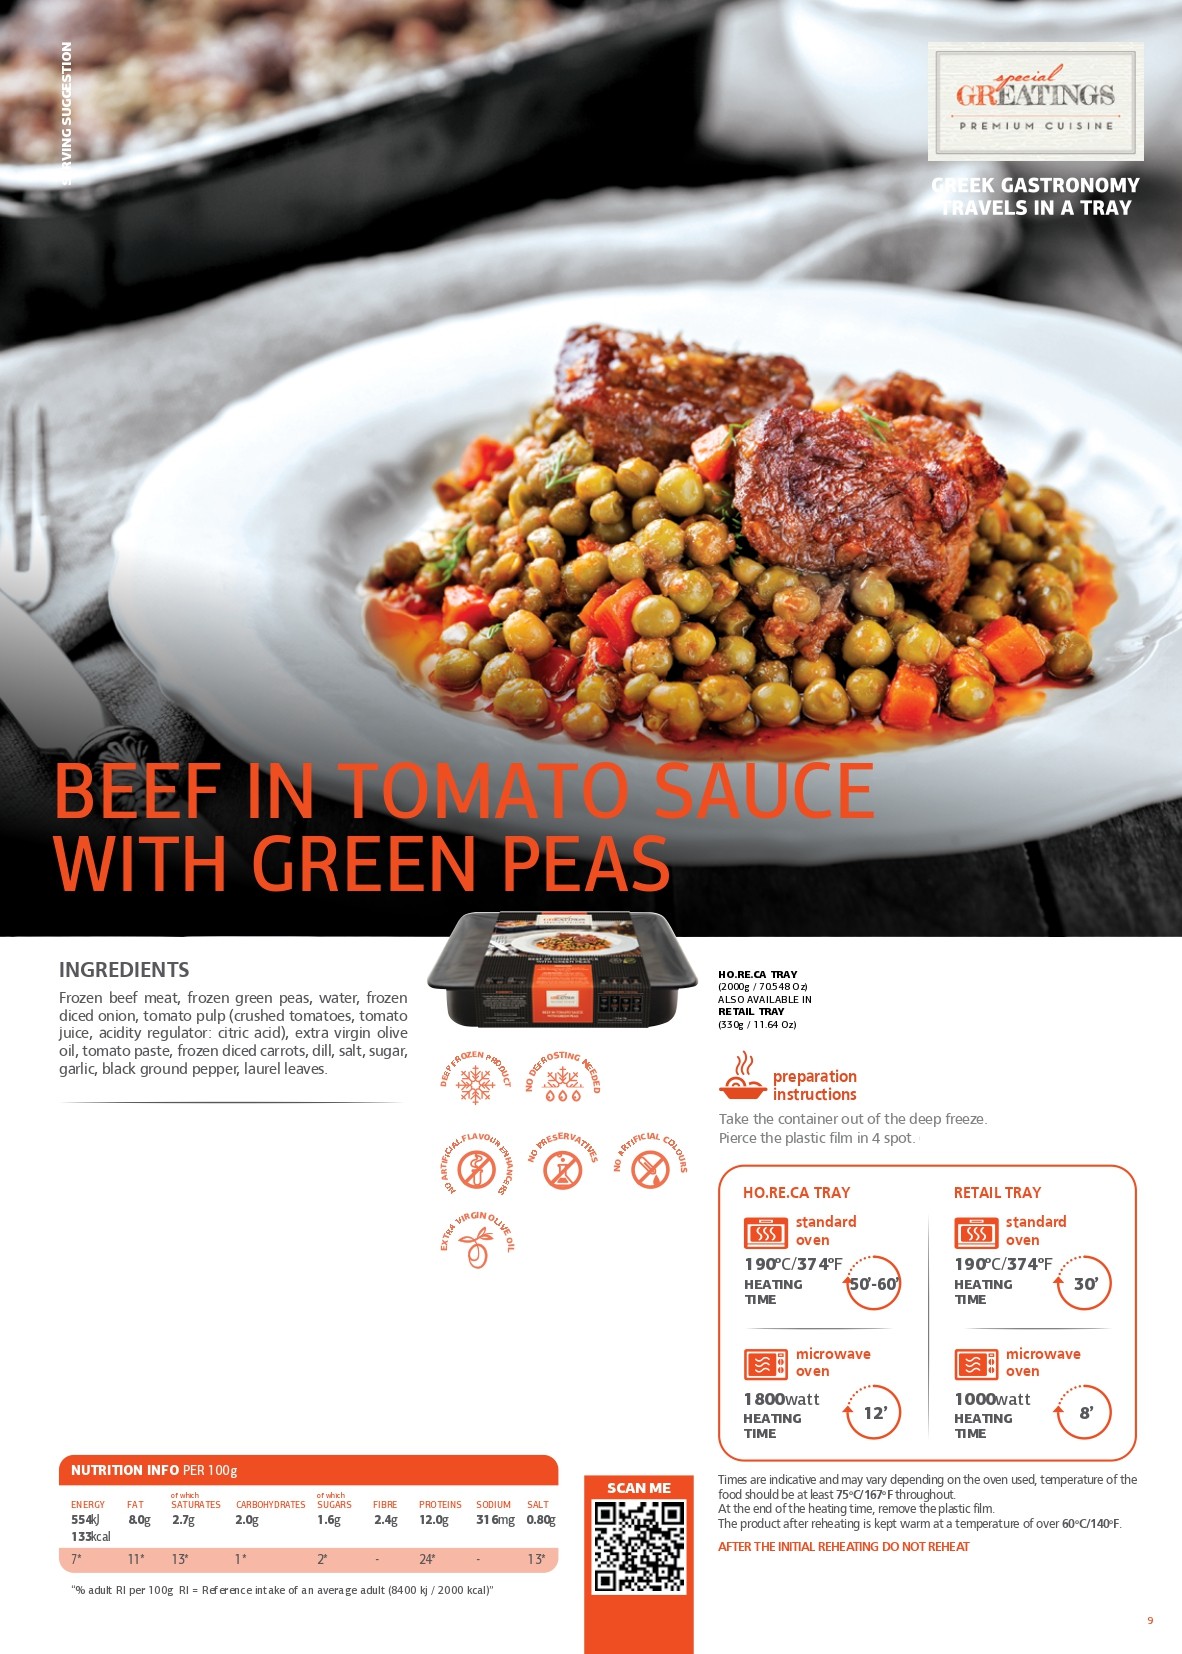 Beef in tomato sauce with green peas pdf image